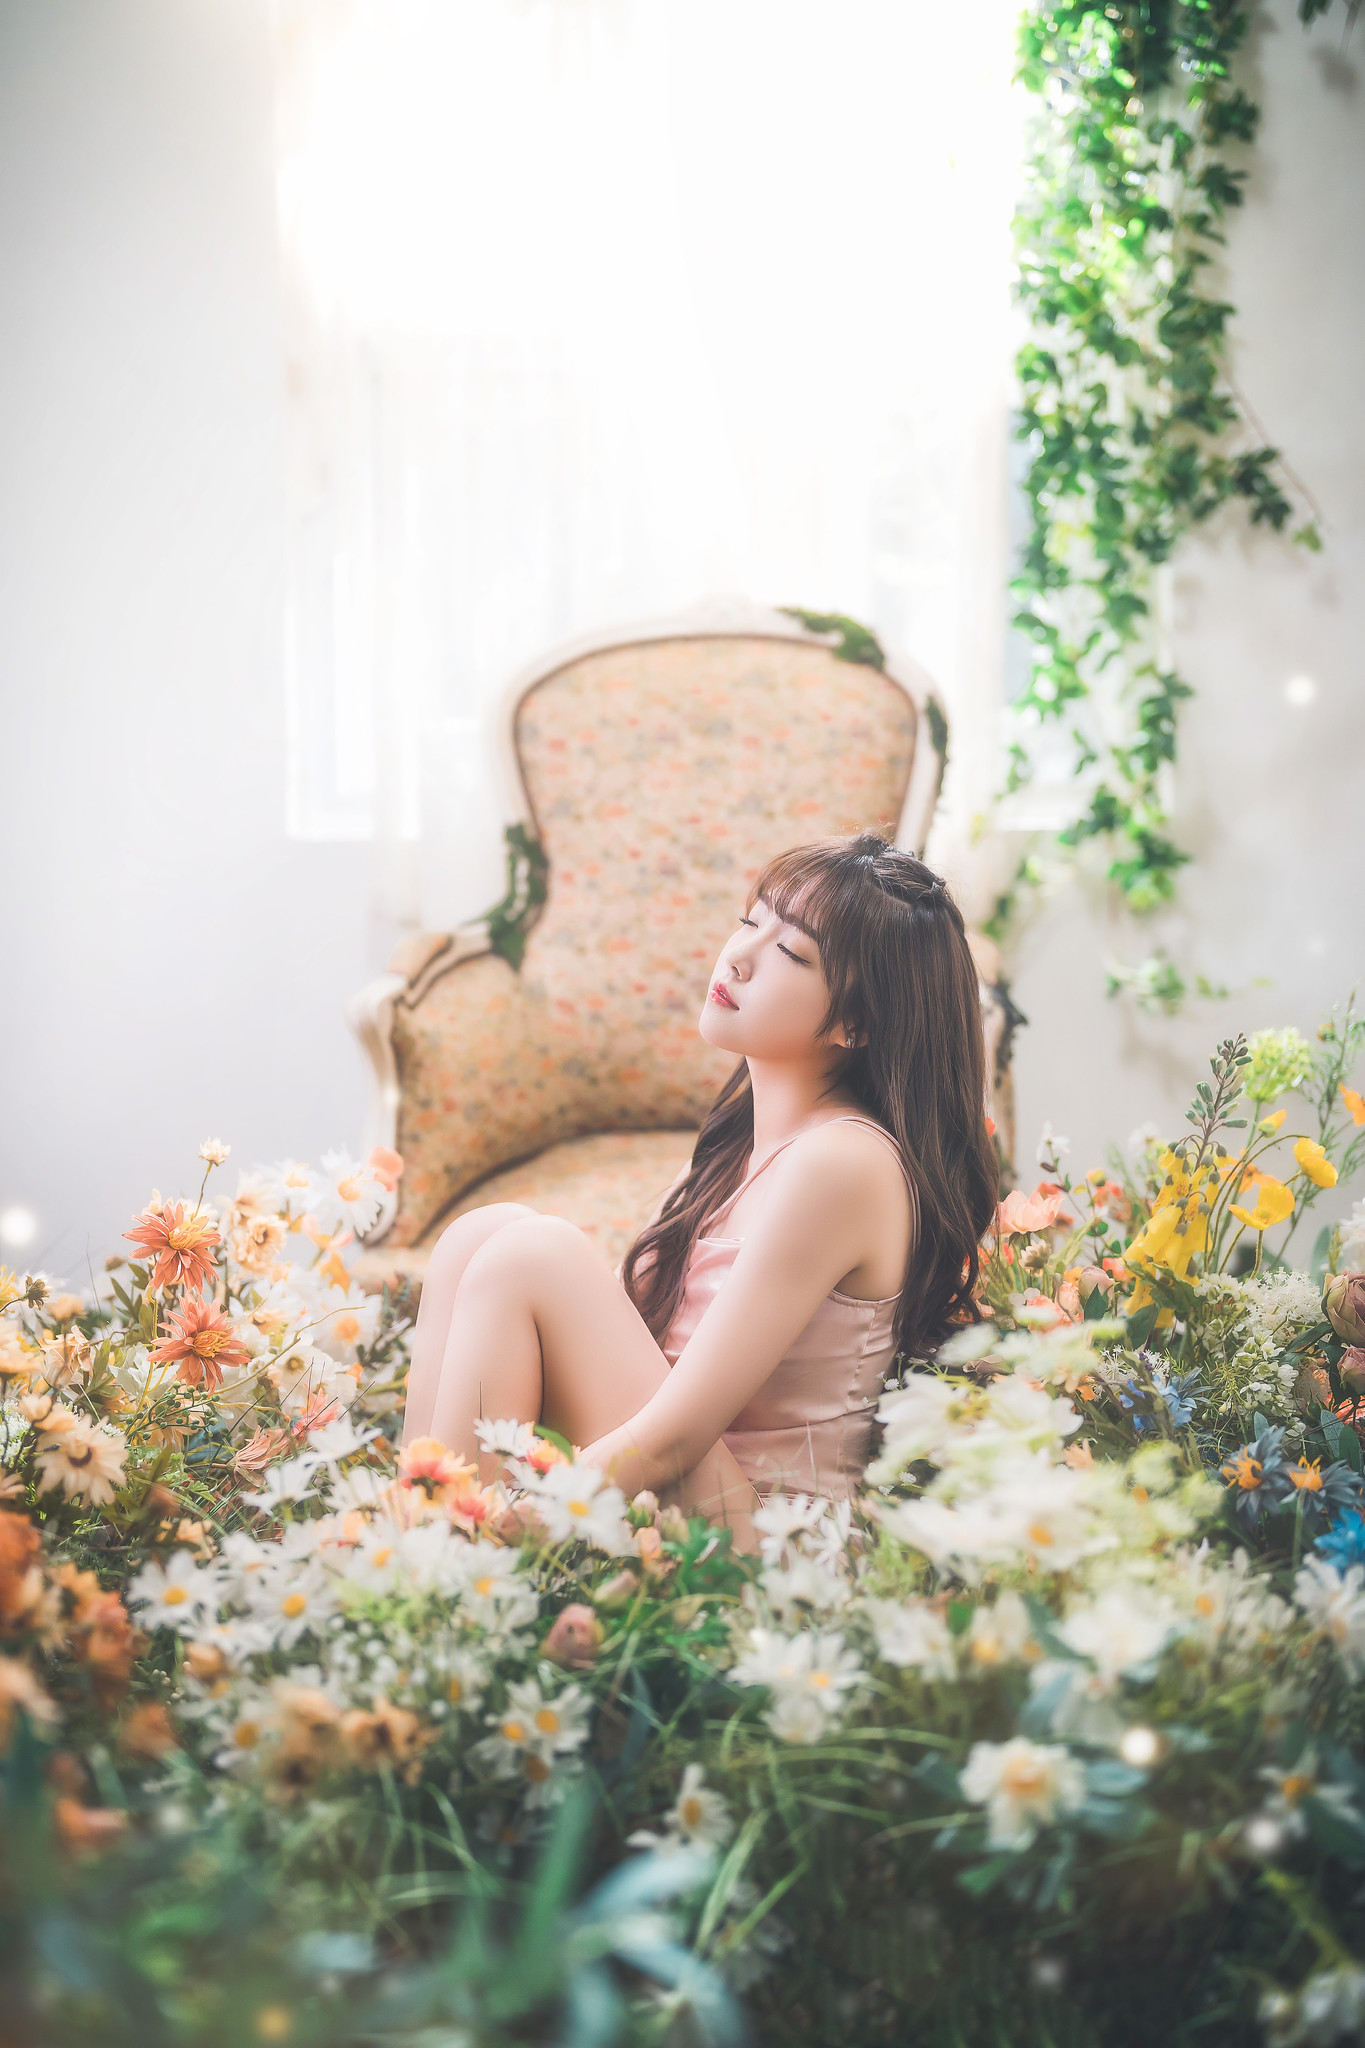 Women Asian Model Closed Eyes Brunette Sitting Knees Together Long Hair Chair Flowers Plants 1365x2048